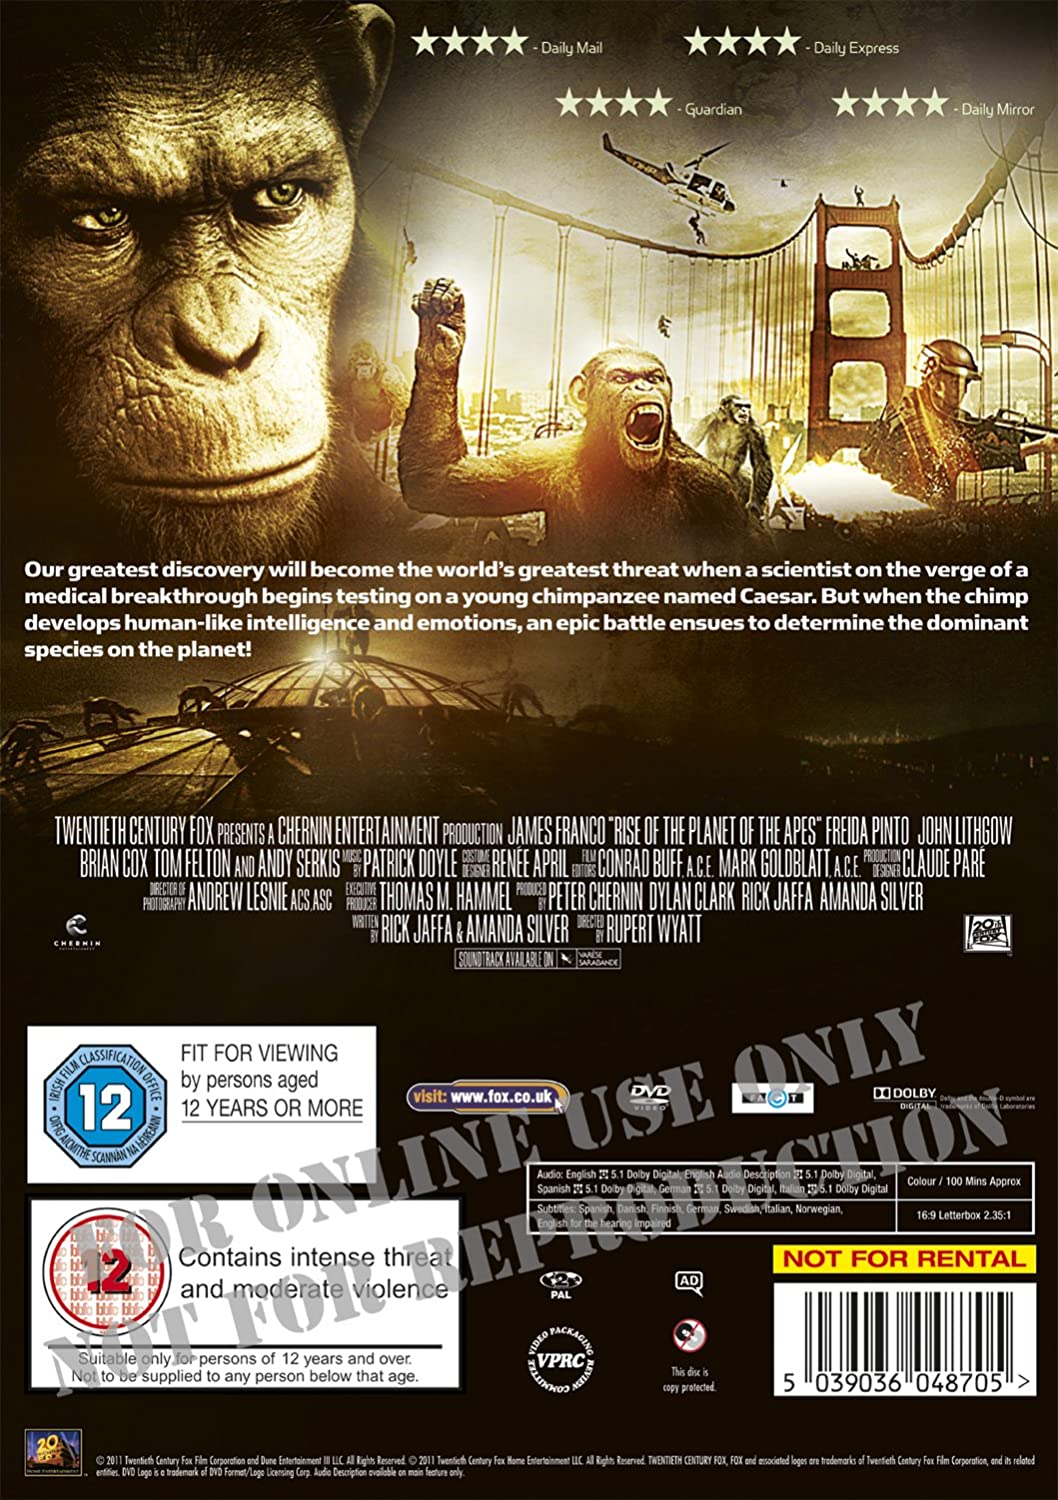 Rise of the Planet of the Apes - Sci-fi/Action [DVD]